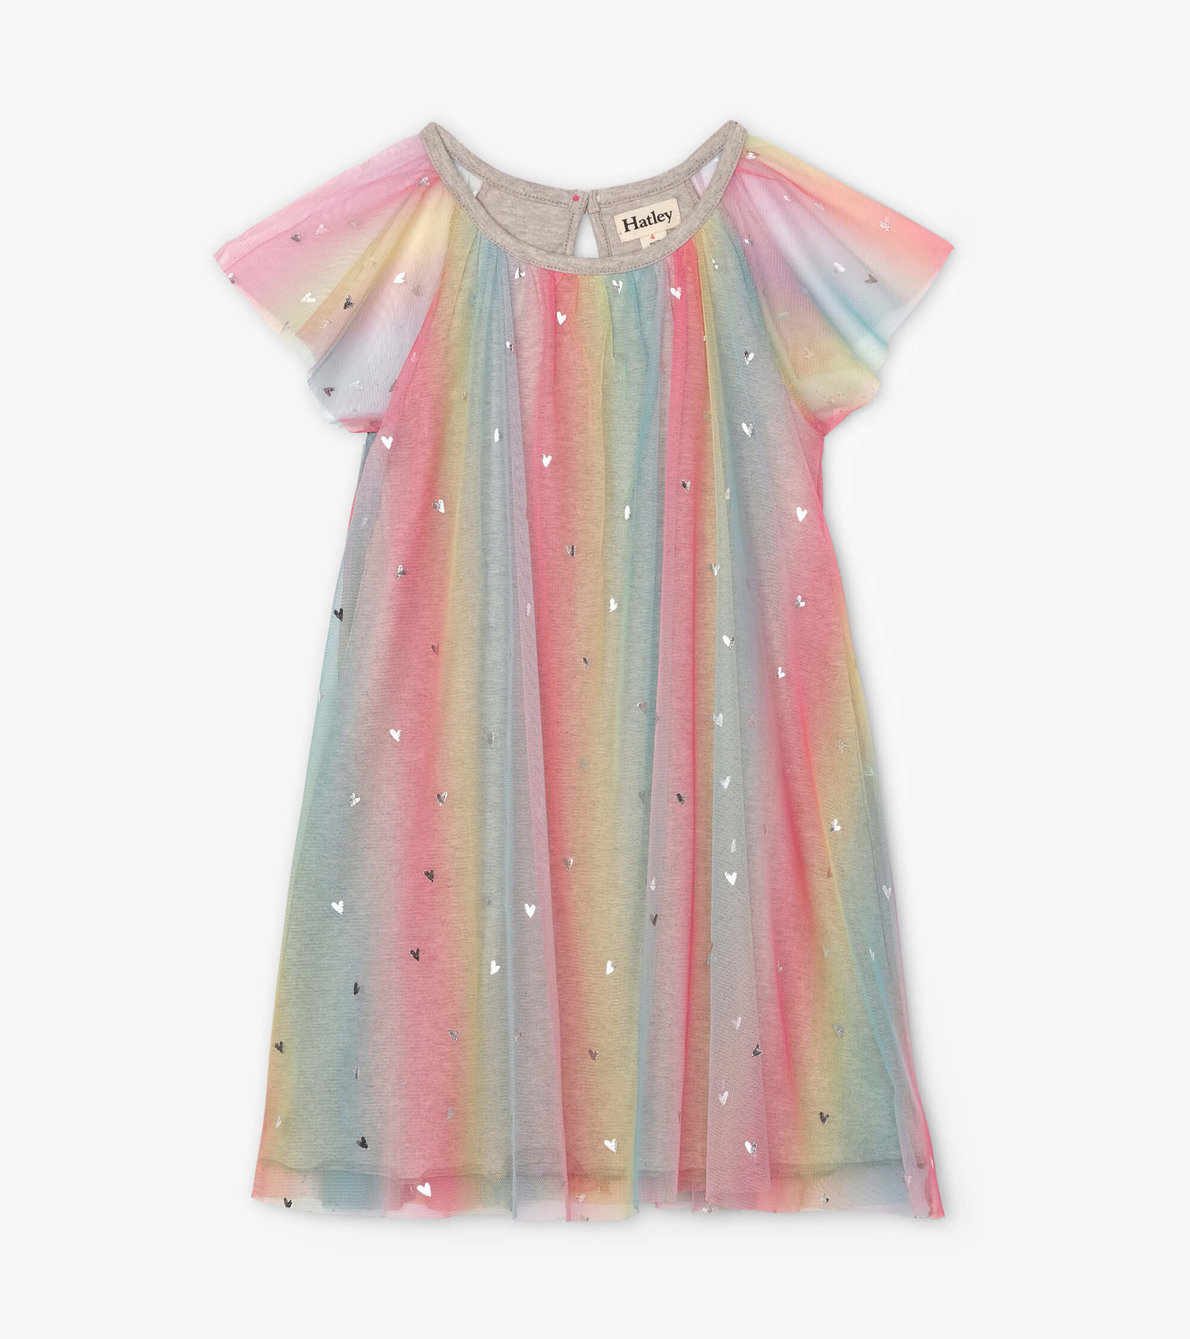 View larger image of Metallic Hearts Rainbow Tulle Dress